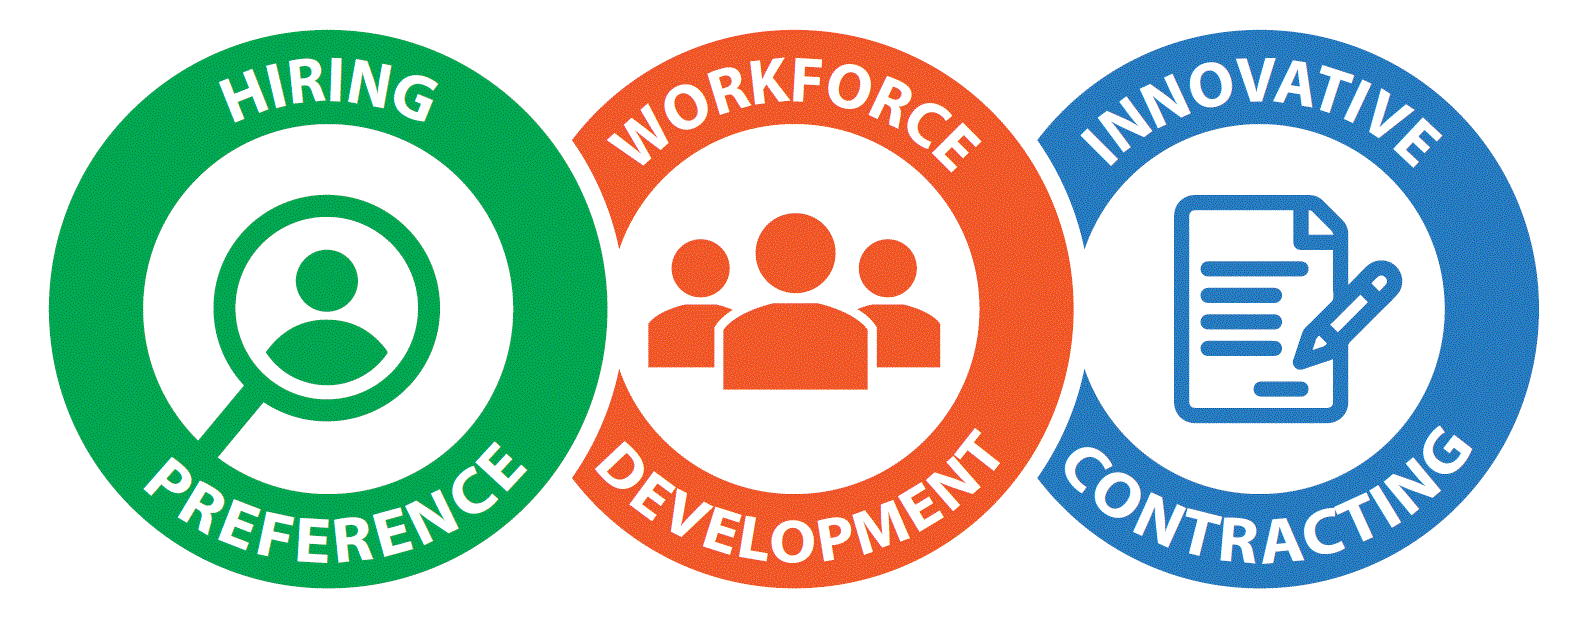 The initiative logo shows the words Workforce Development with intersecting circles on either side that read Hiring Preferences and Innovative Contracting.